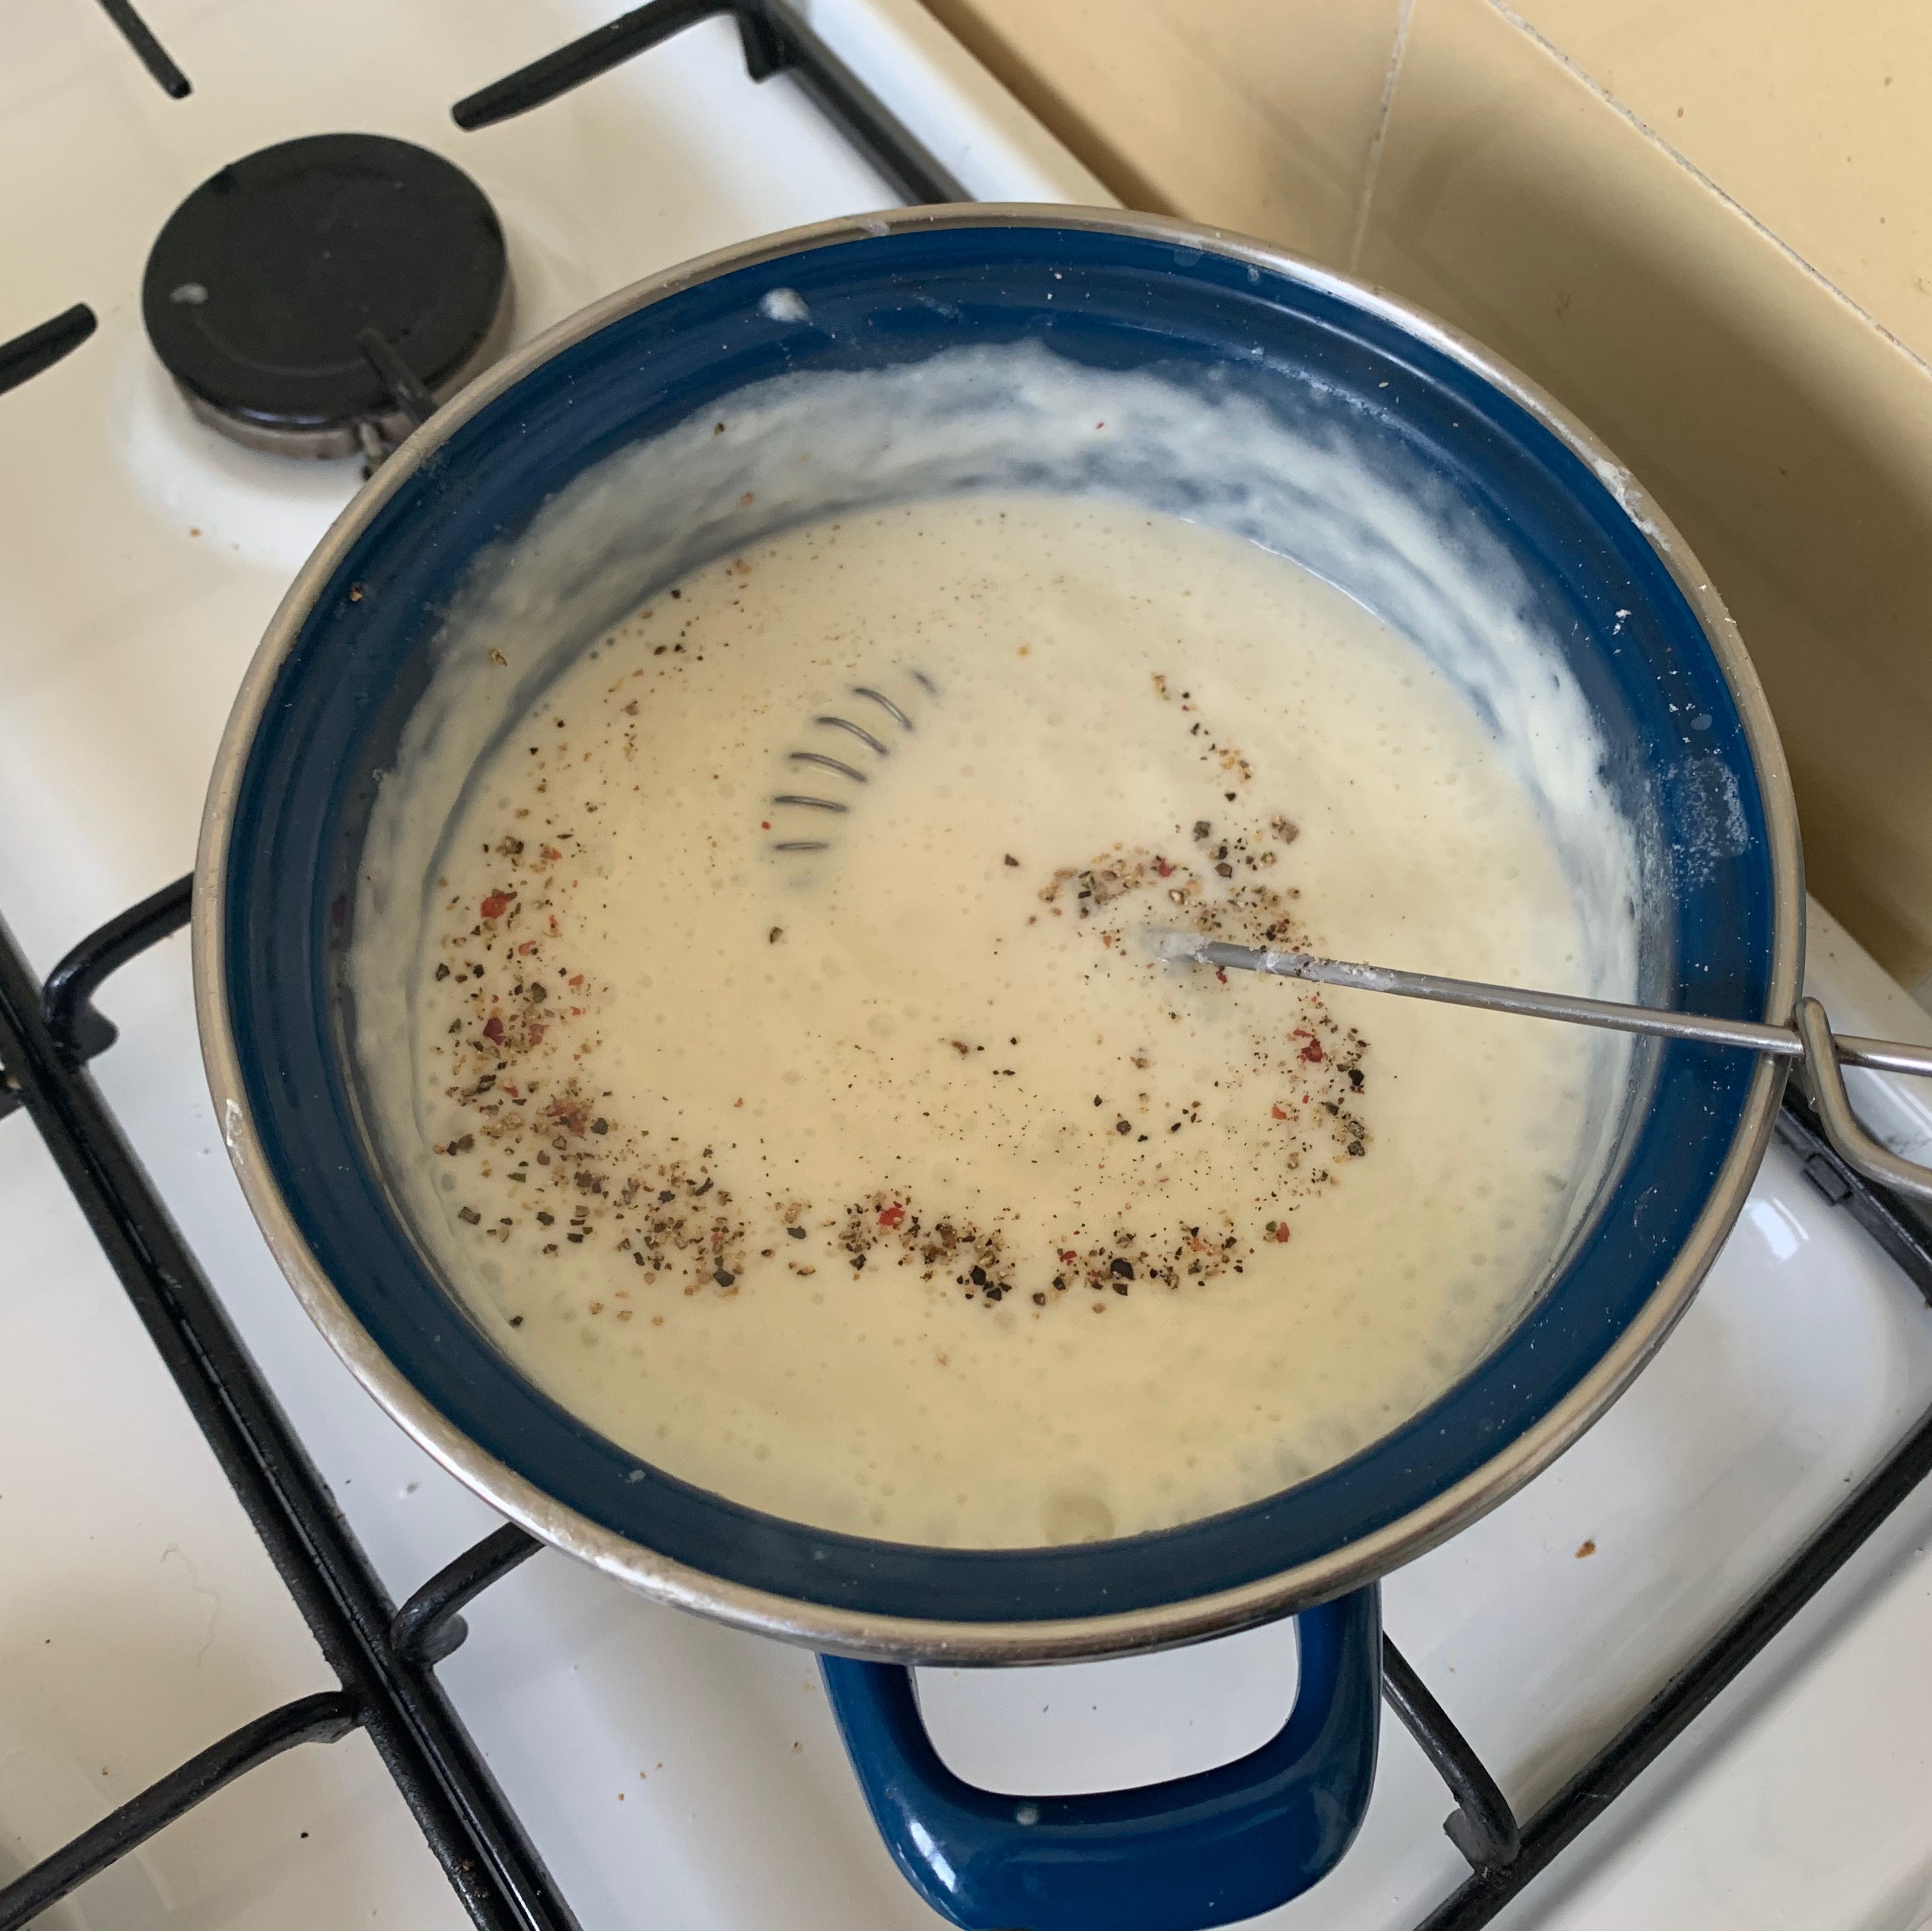 Gradually pour in the milk, stirring constantly, bring to a boil. Simmer on low heat for 10-15 min. Stir occasionally and add cream cheese. If the béchamel sauce becomes too thick, carefully add a little water. Season with nutmeg, salt and pepper.